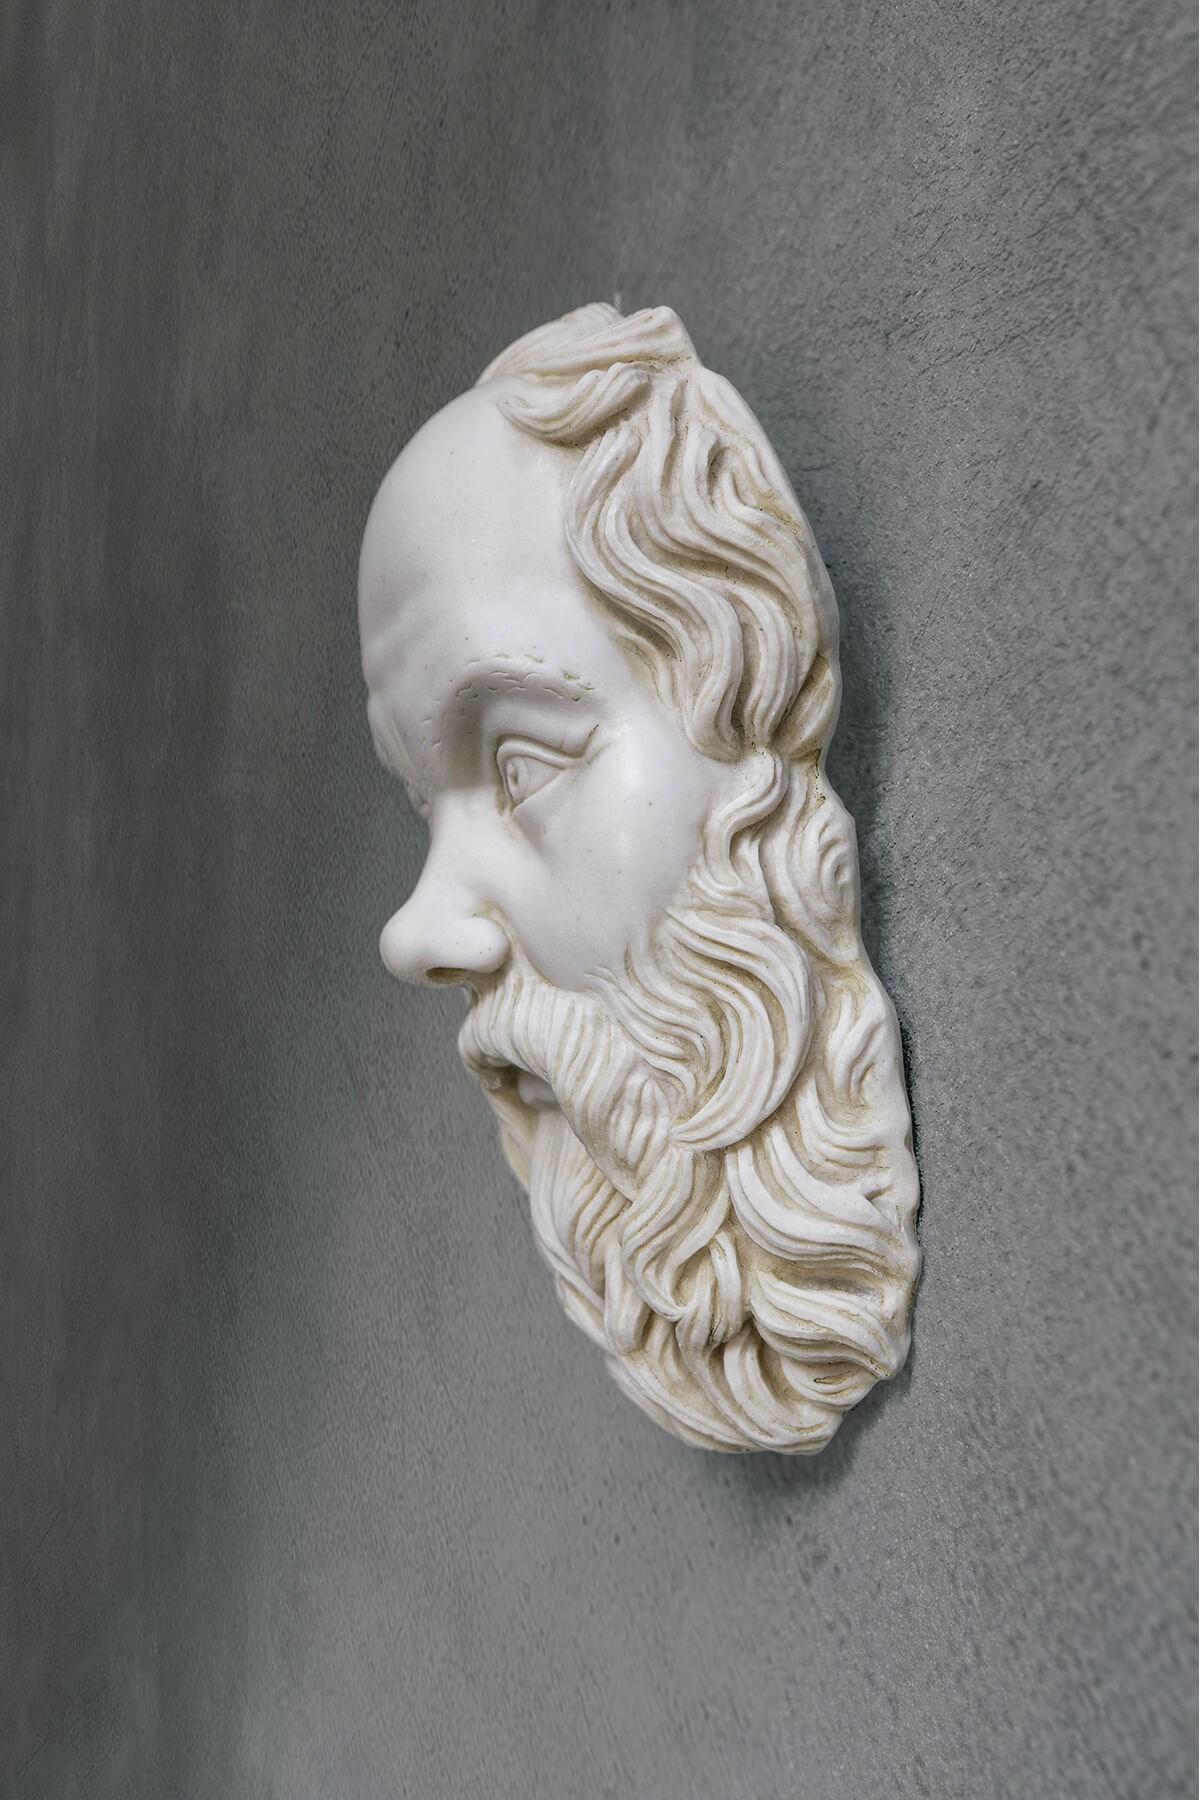 Turkish Socrates Mask Made with Compressed Marble Powder 'Ephesus Museum'